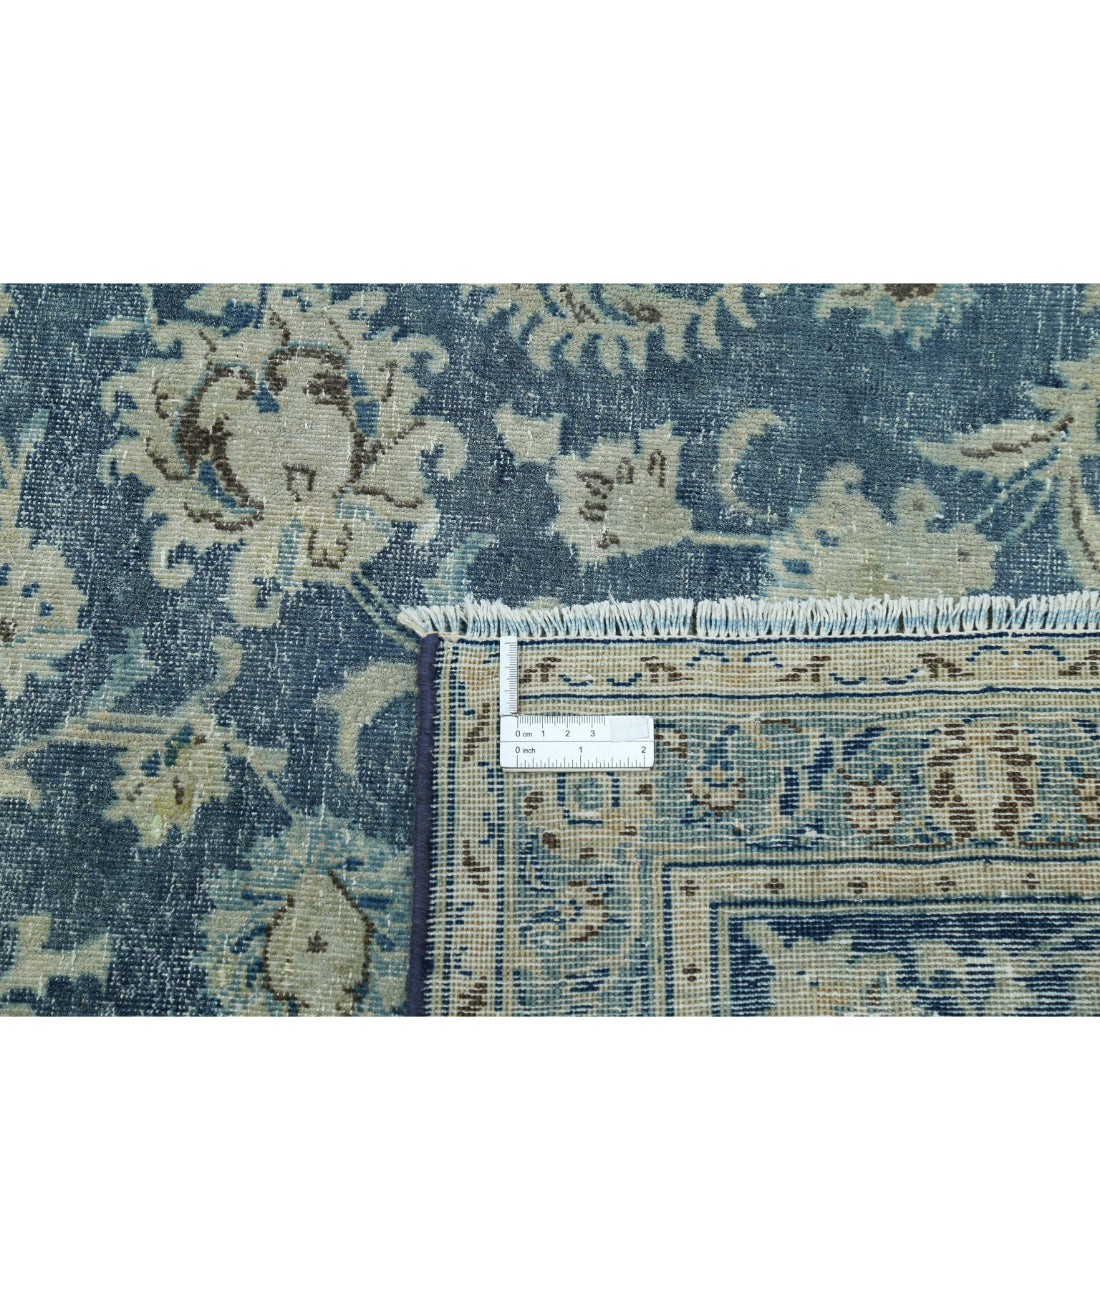 Hand Knotted Vintage Persian Kashan Wool Rug - 8'8'' x 12'0'' 8'8'' x 12'0'' (260 X 360) / Blue / Blue